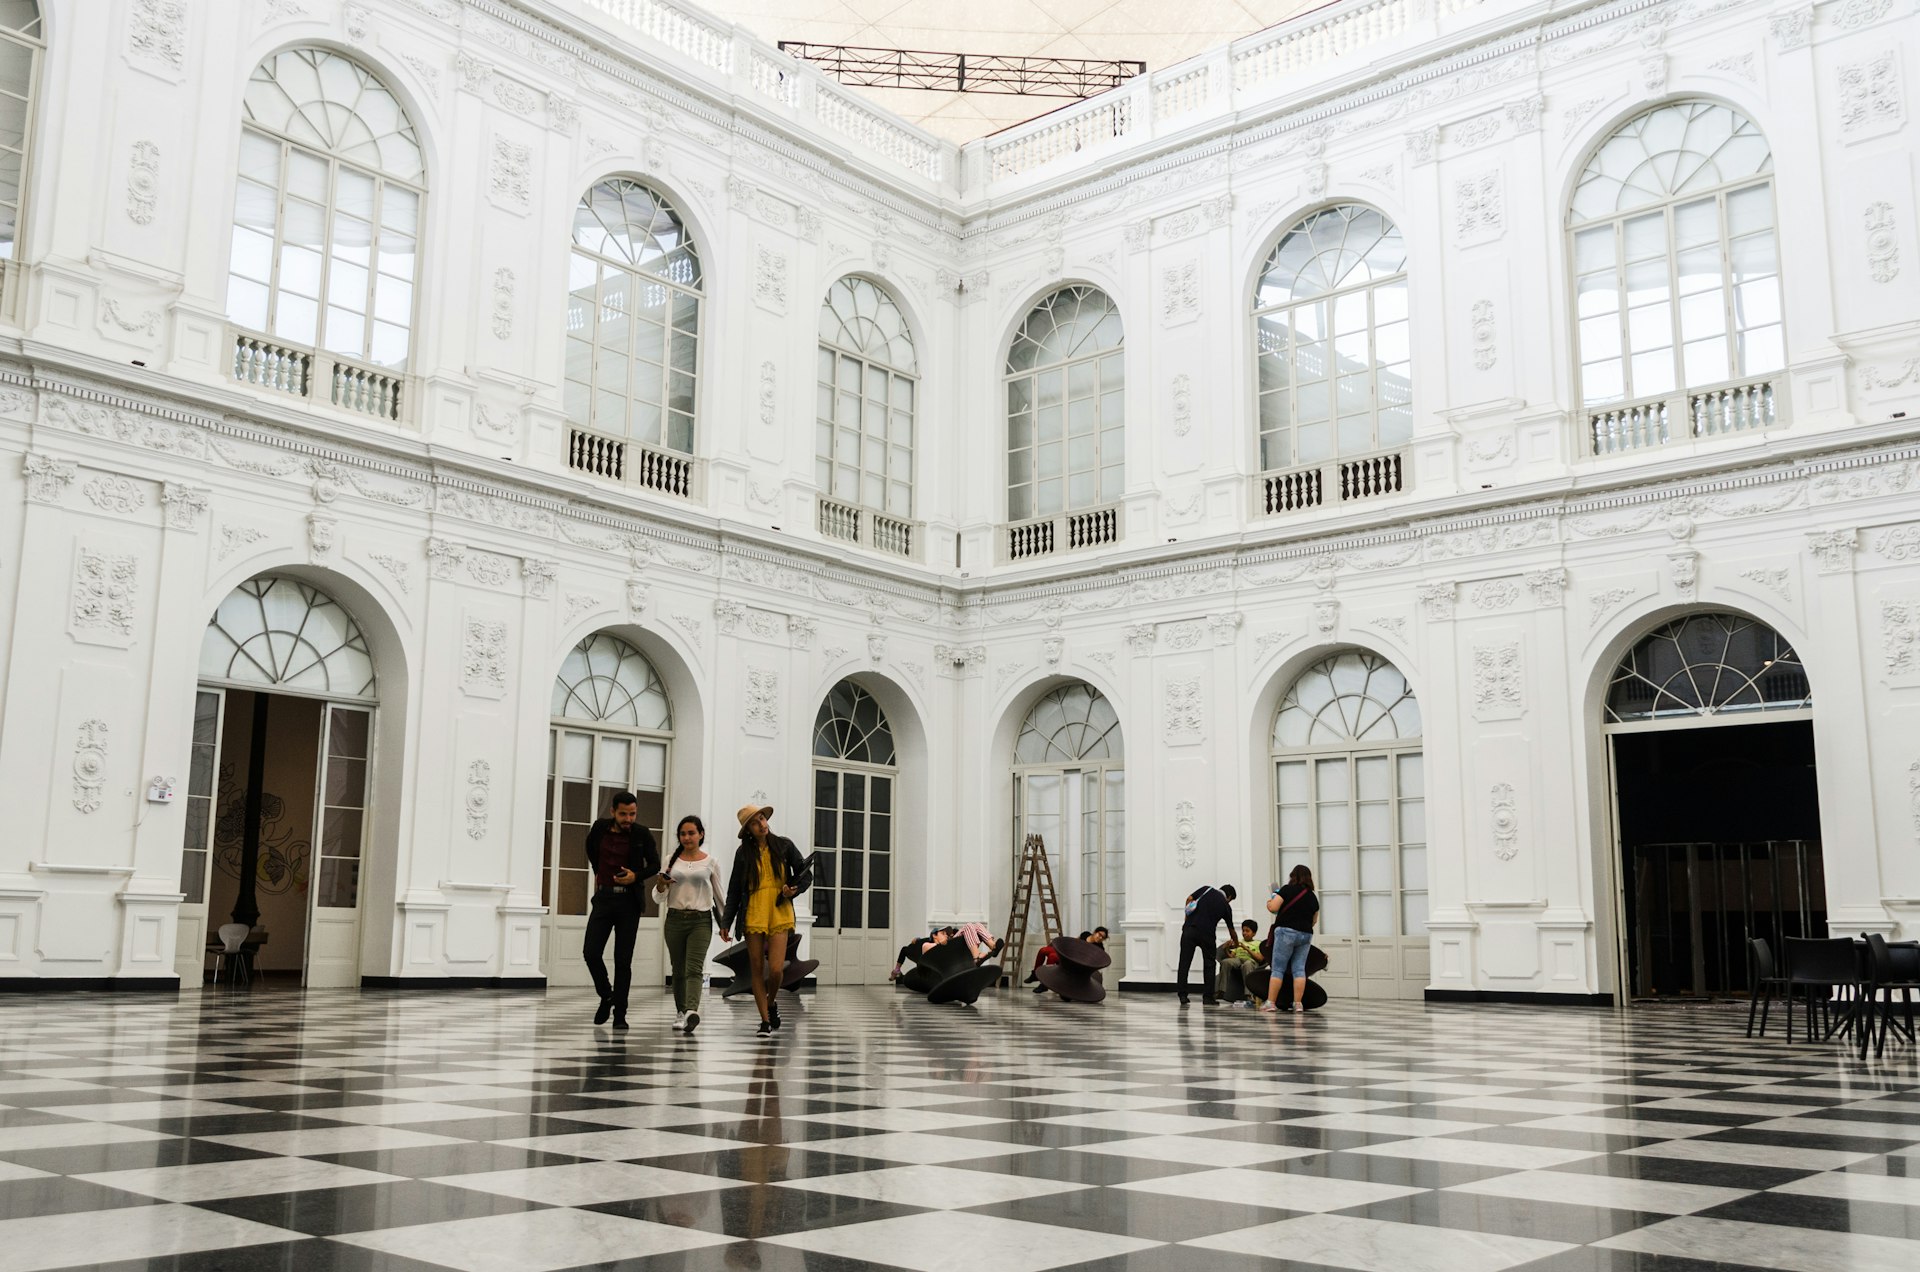 People walk across a vast black-and-white checked floor surrounded by white walls with arched windows